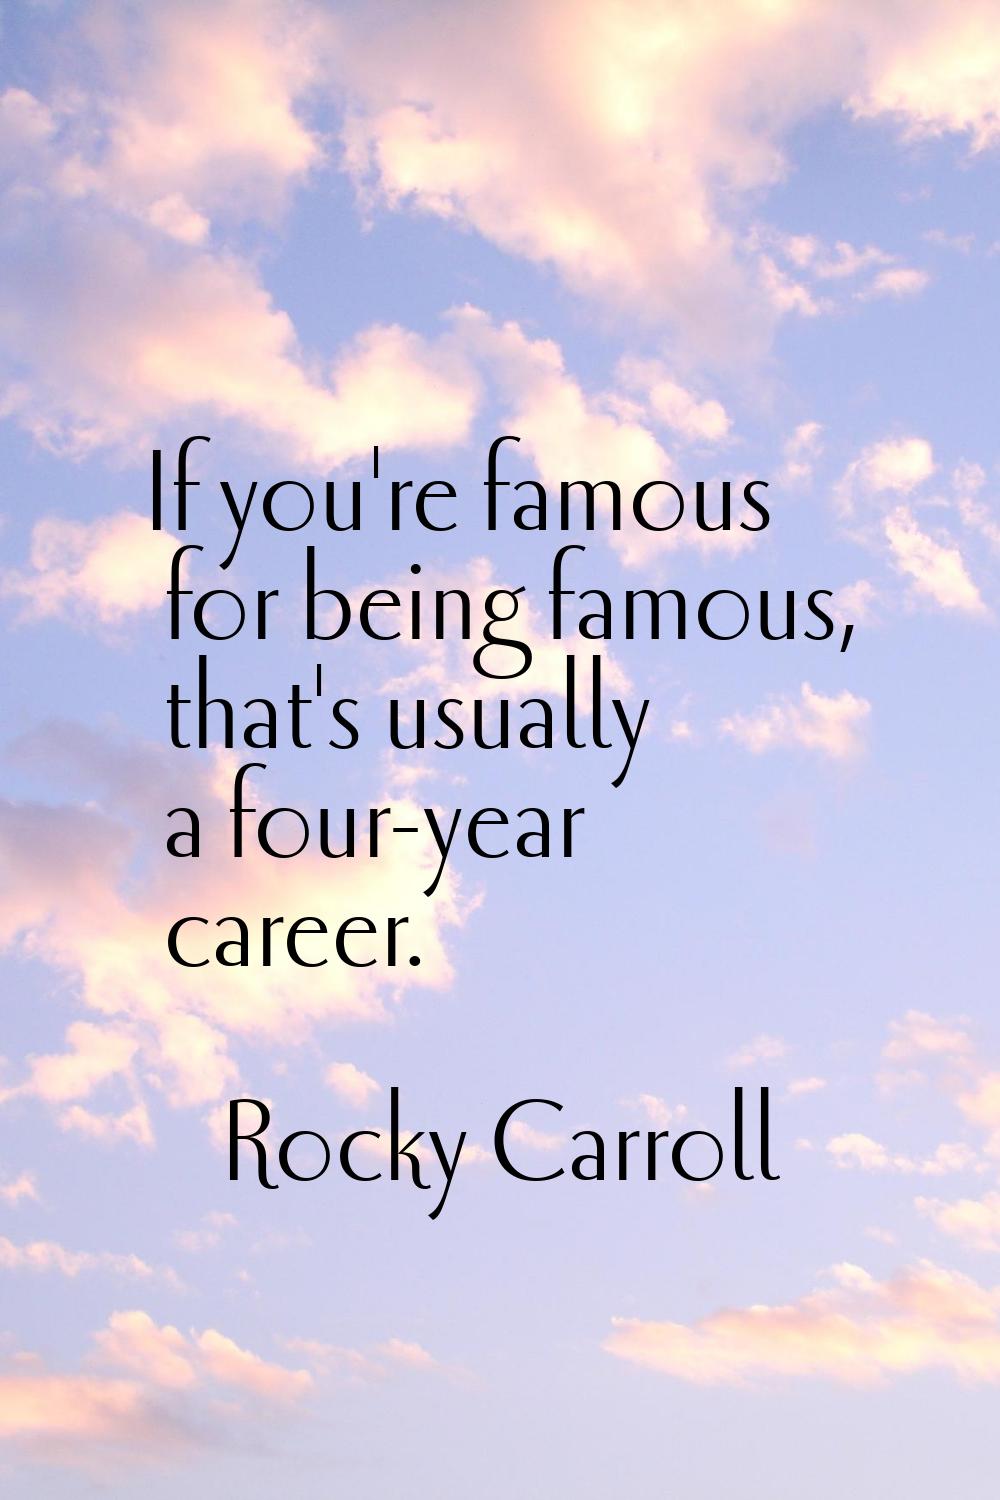 If you're famous for being famous, that's usually a four-year career.